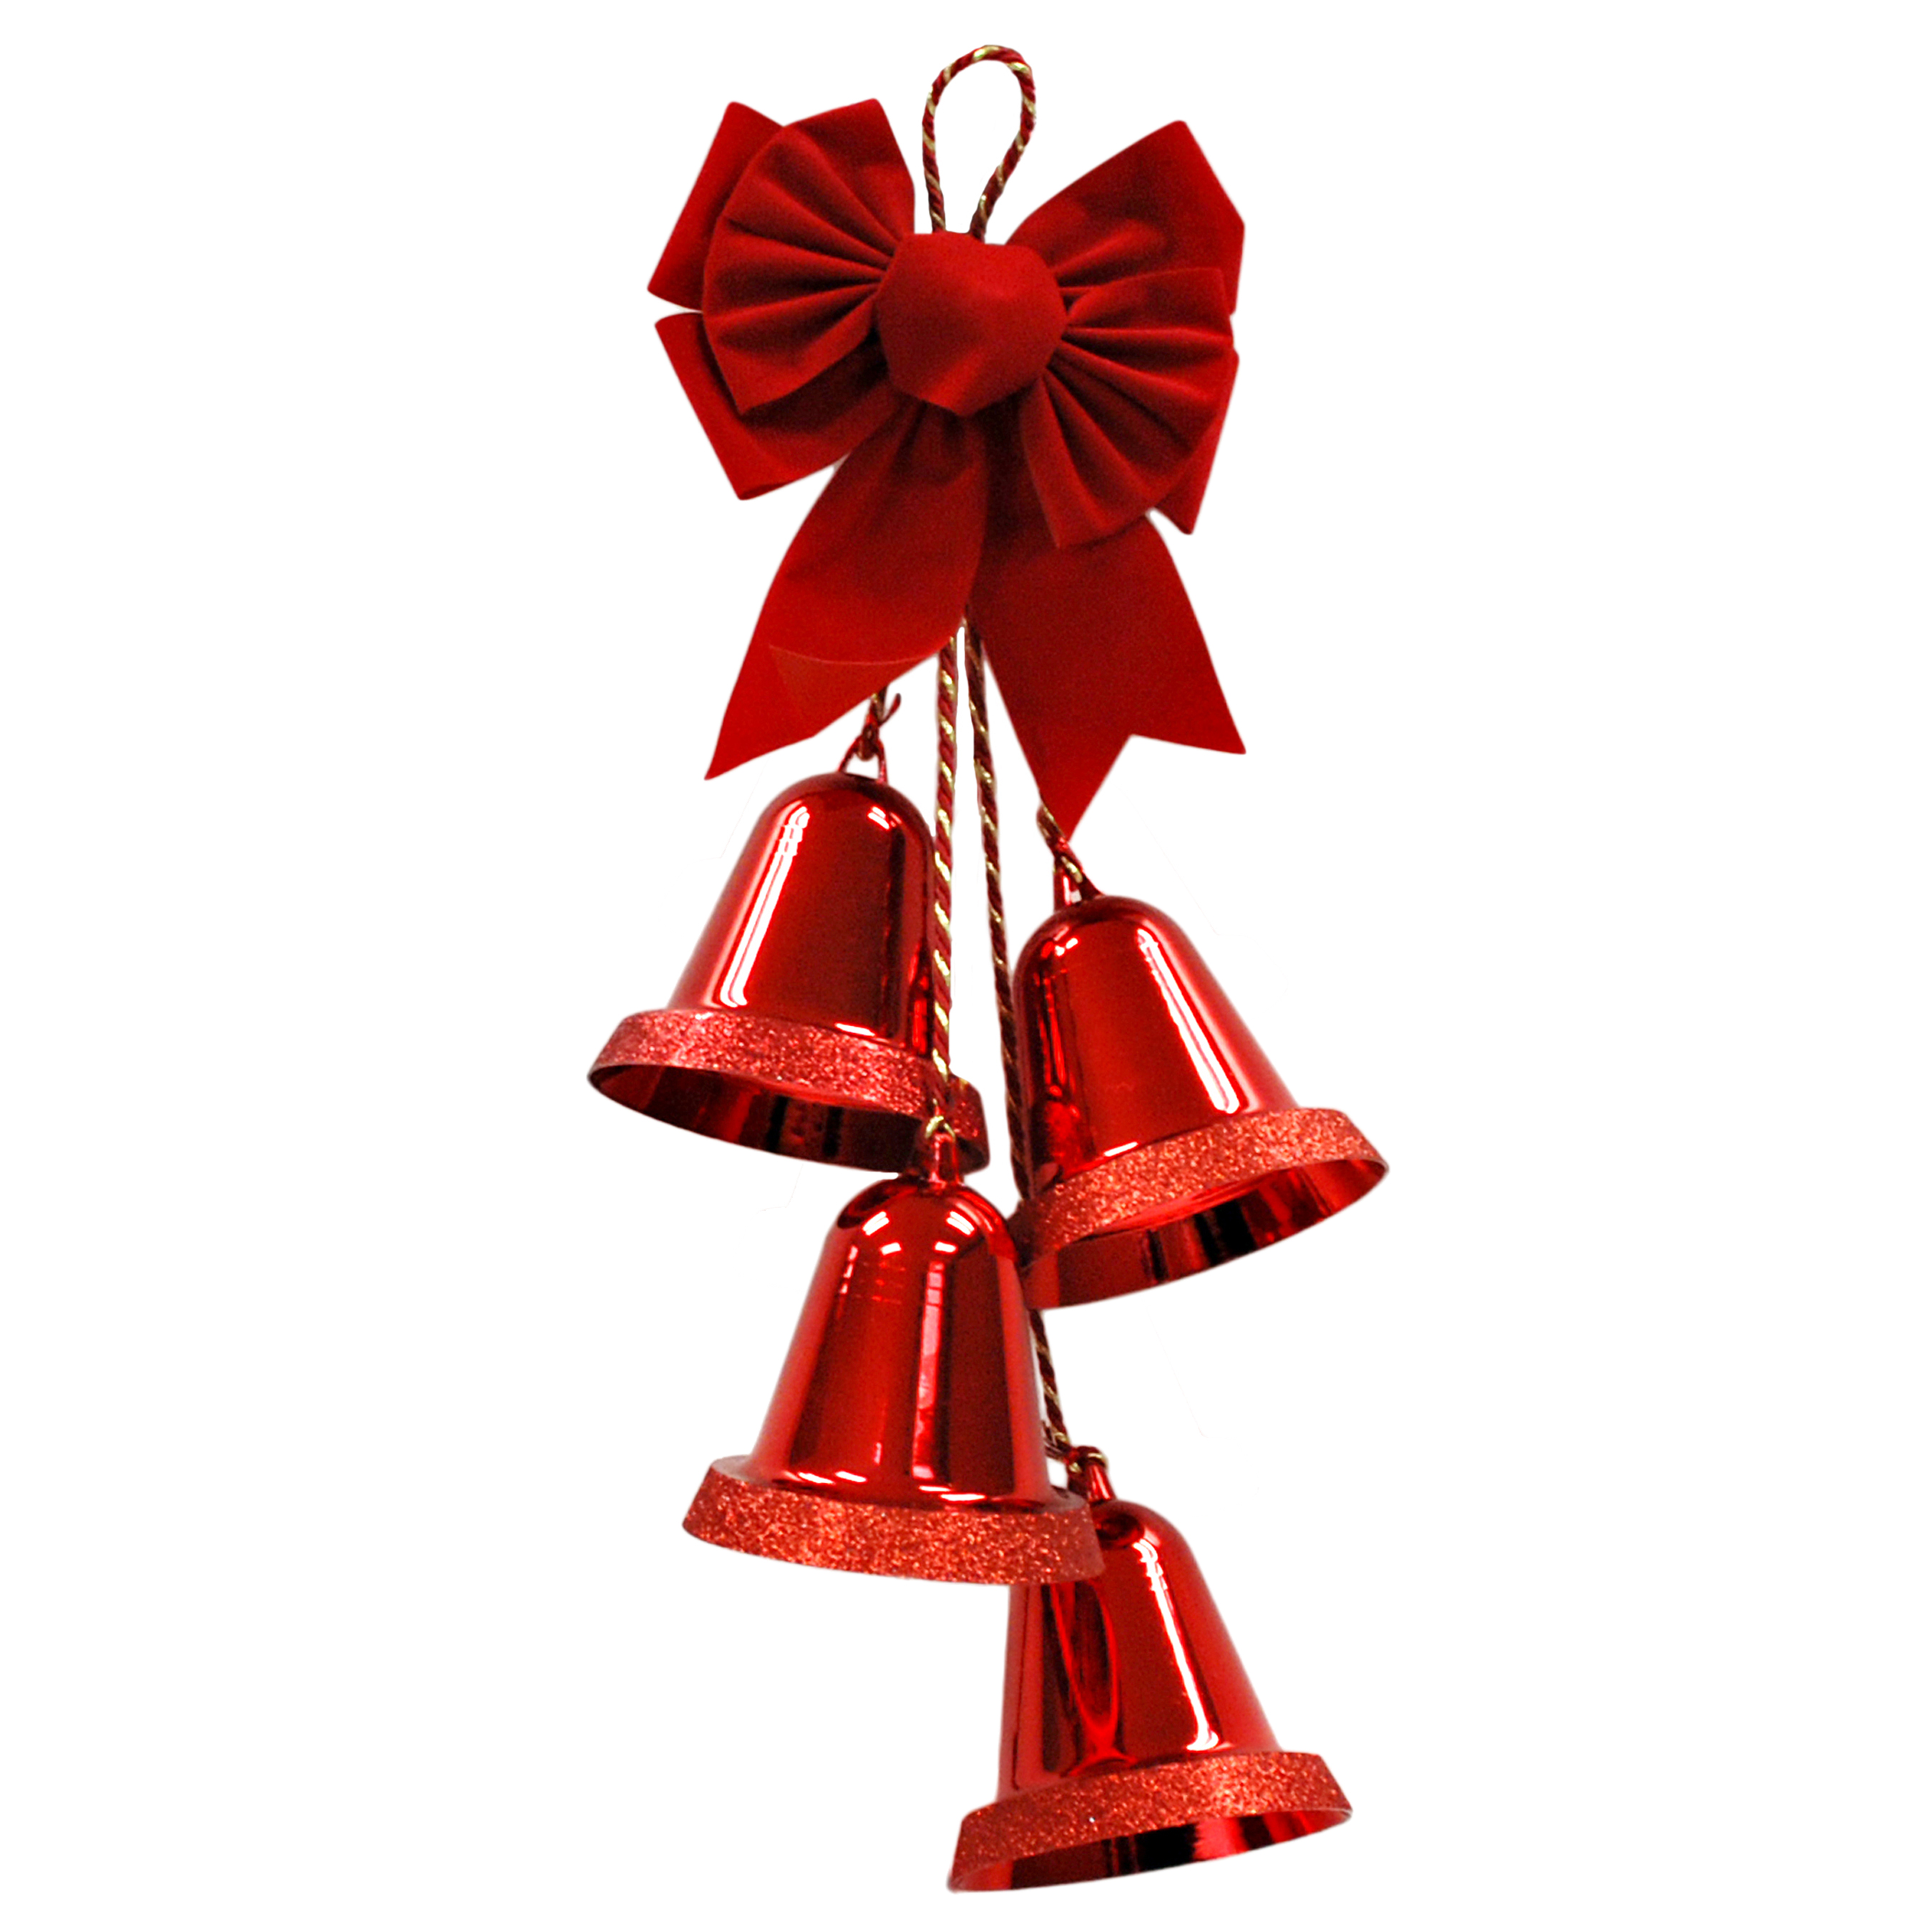 Trim A Home® 27" - 4 Large Red Glitter Edge Christmas Bells with Red Velvet Bow Door Hangers